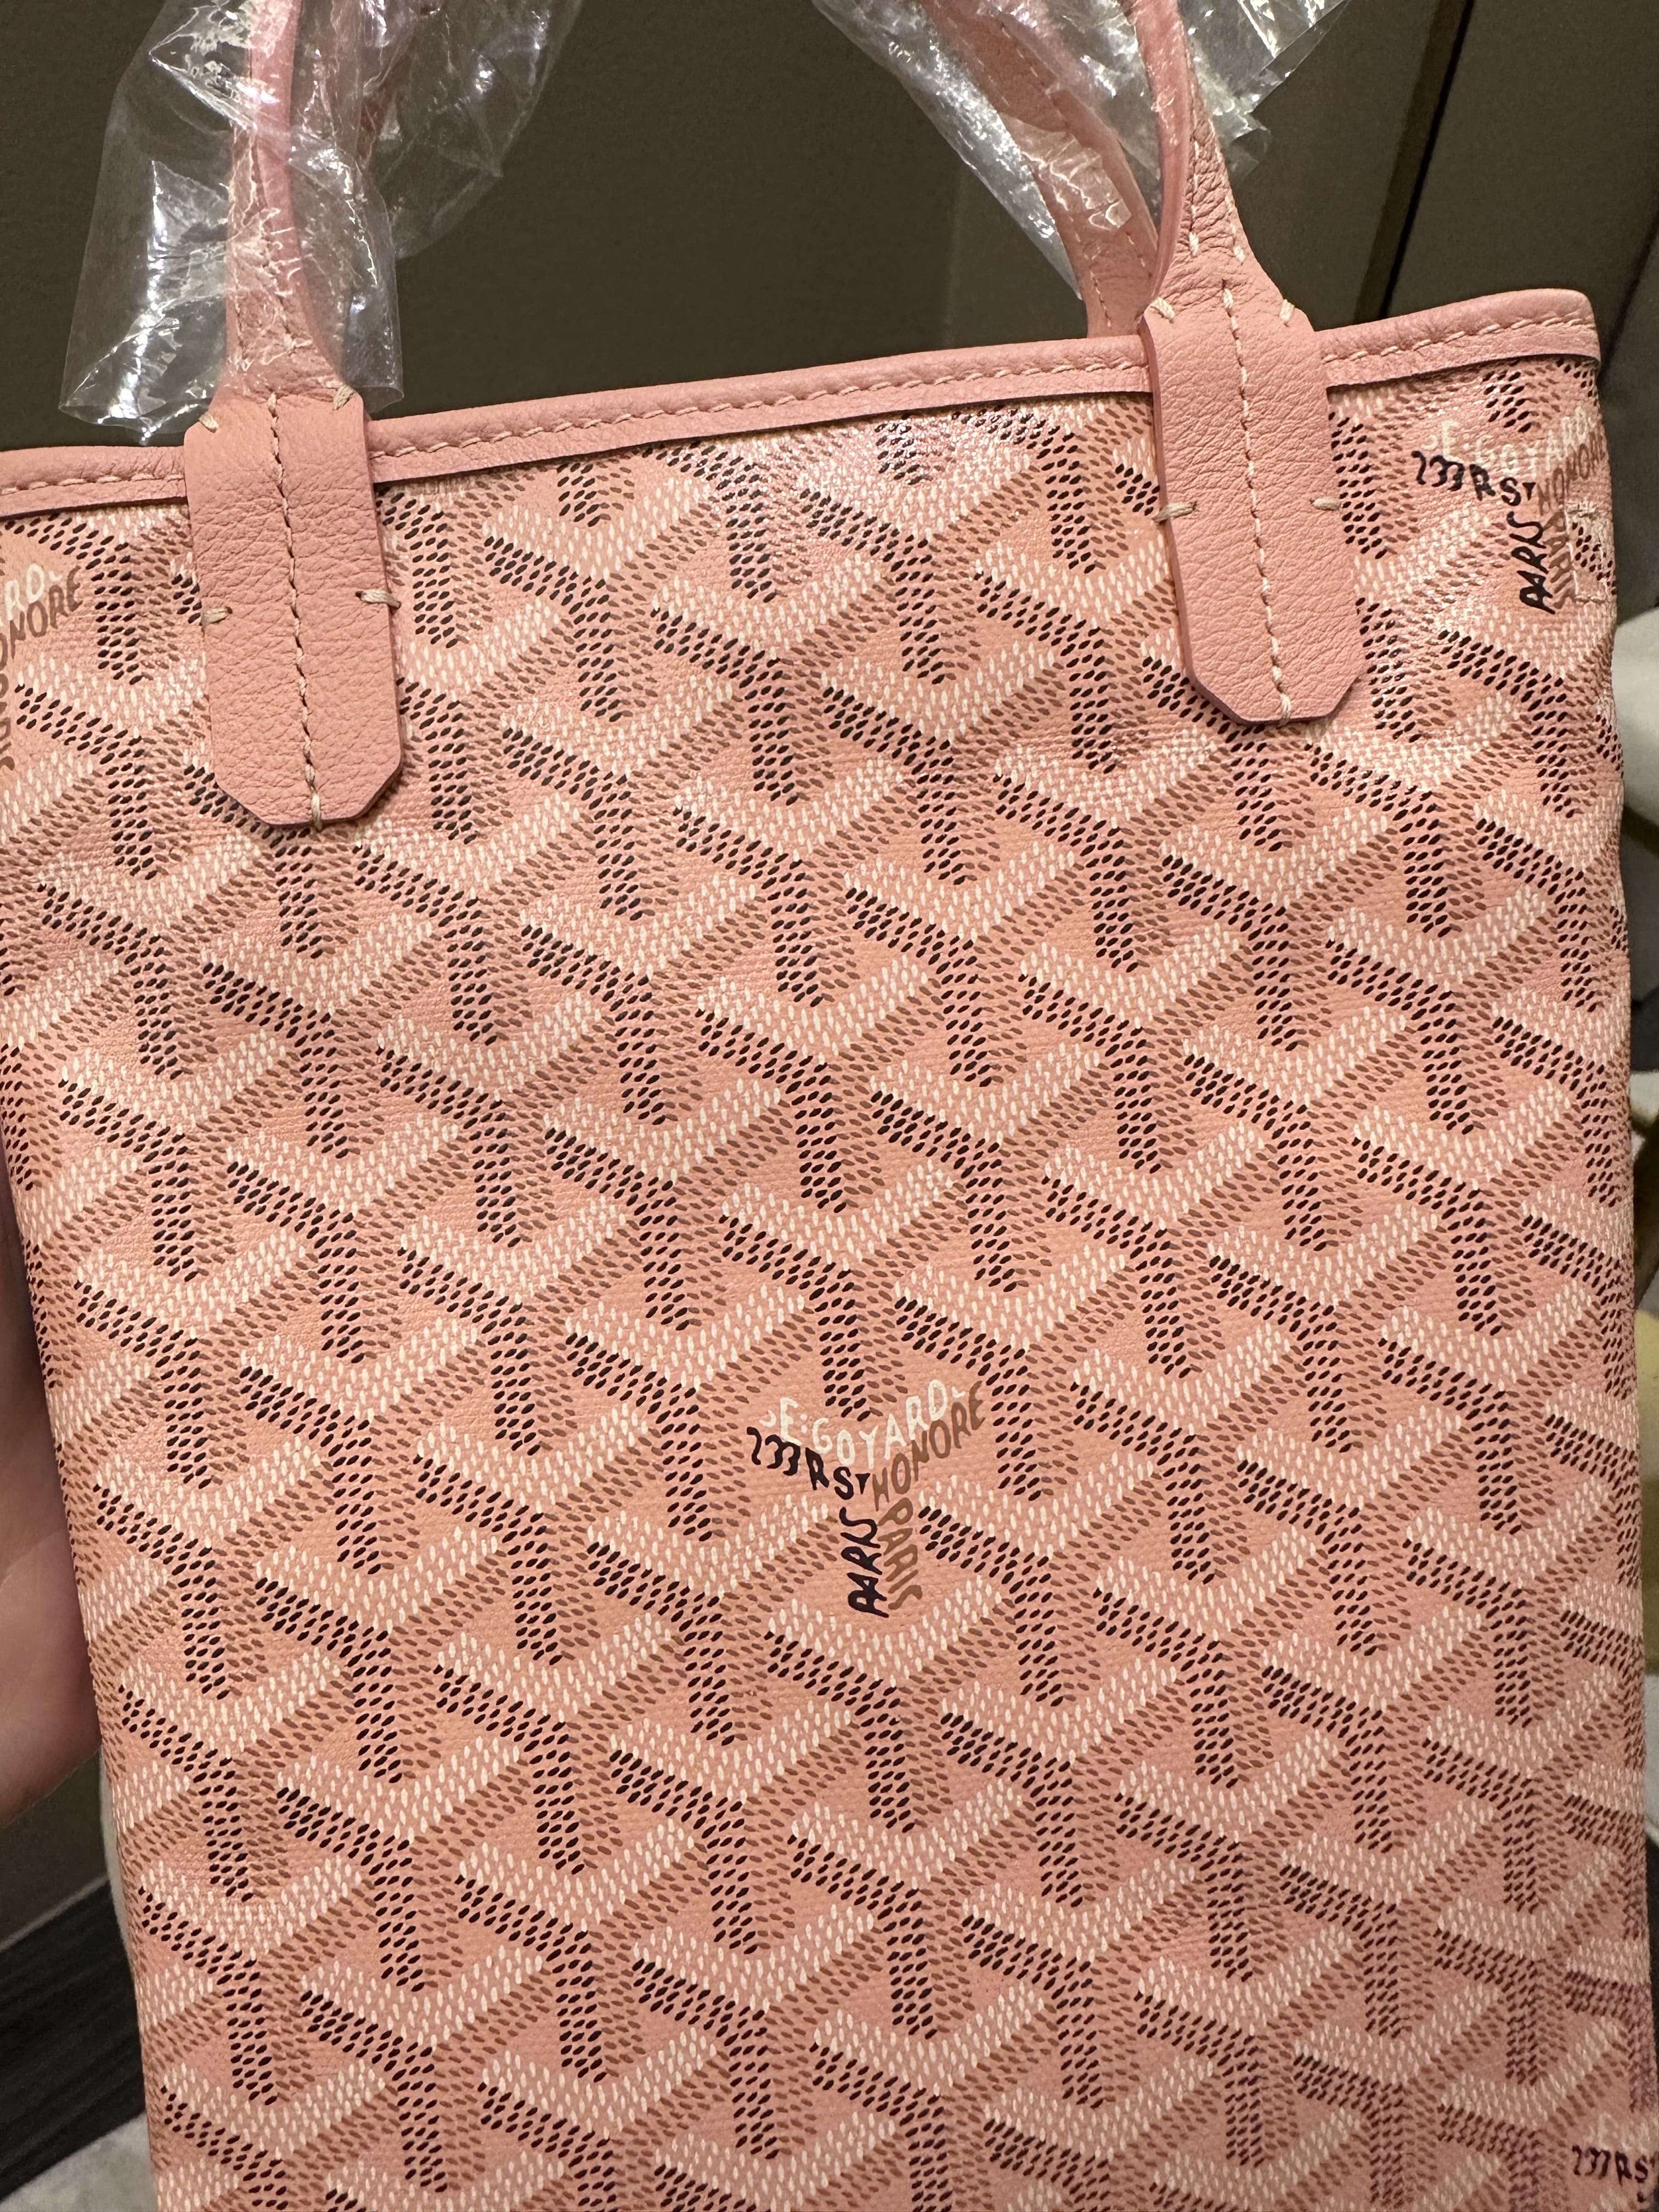 Authentic GOYARD Poitier - Pink with customized Snoopy *Free Shipping*